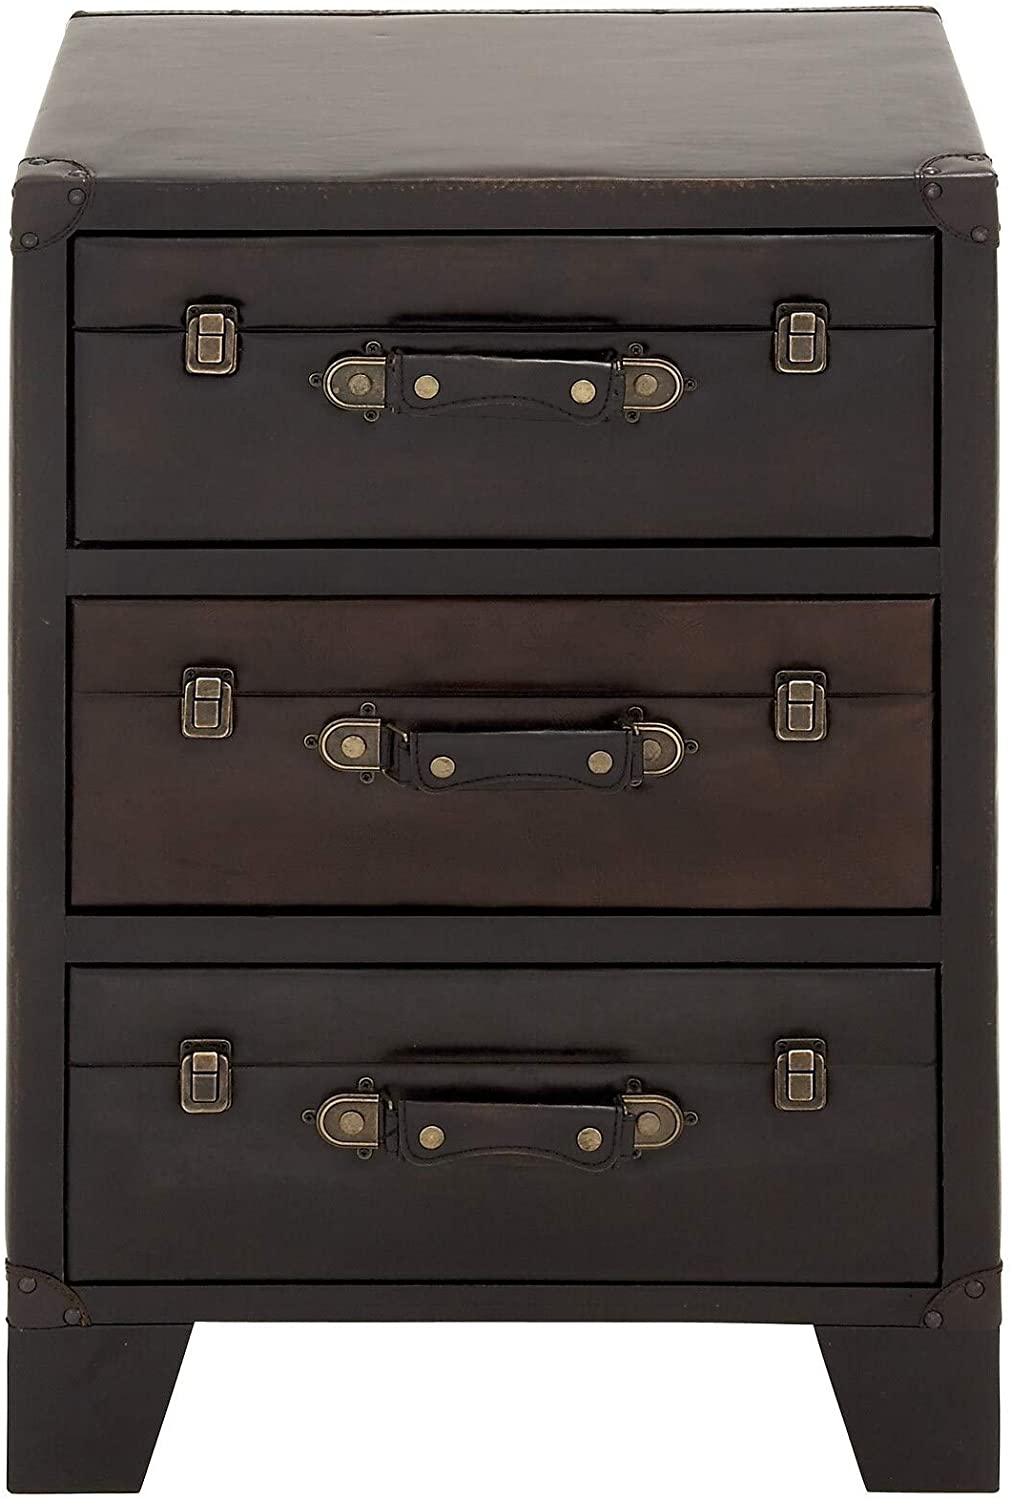 MISC Wood Faux Leather Side Cabinet (19 Inches Wide X 28 High) Brown Traditional Square Rubbed